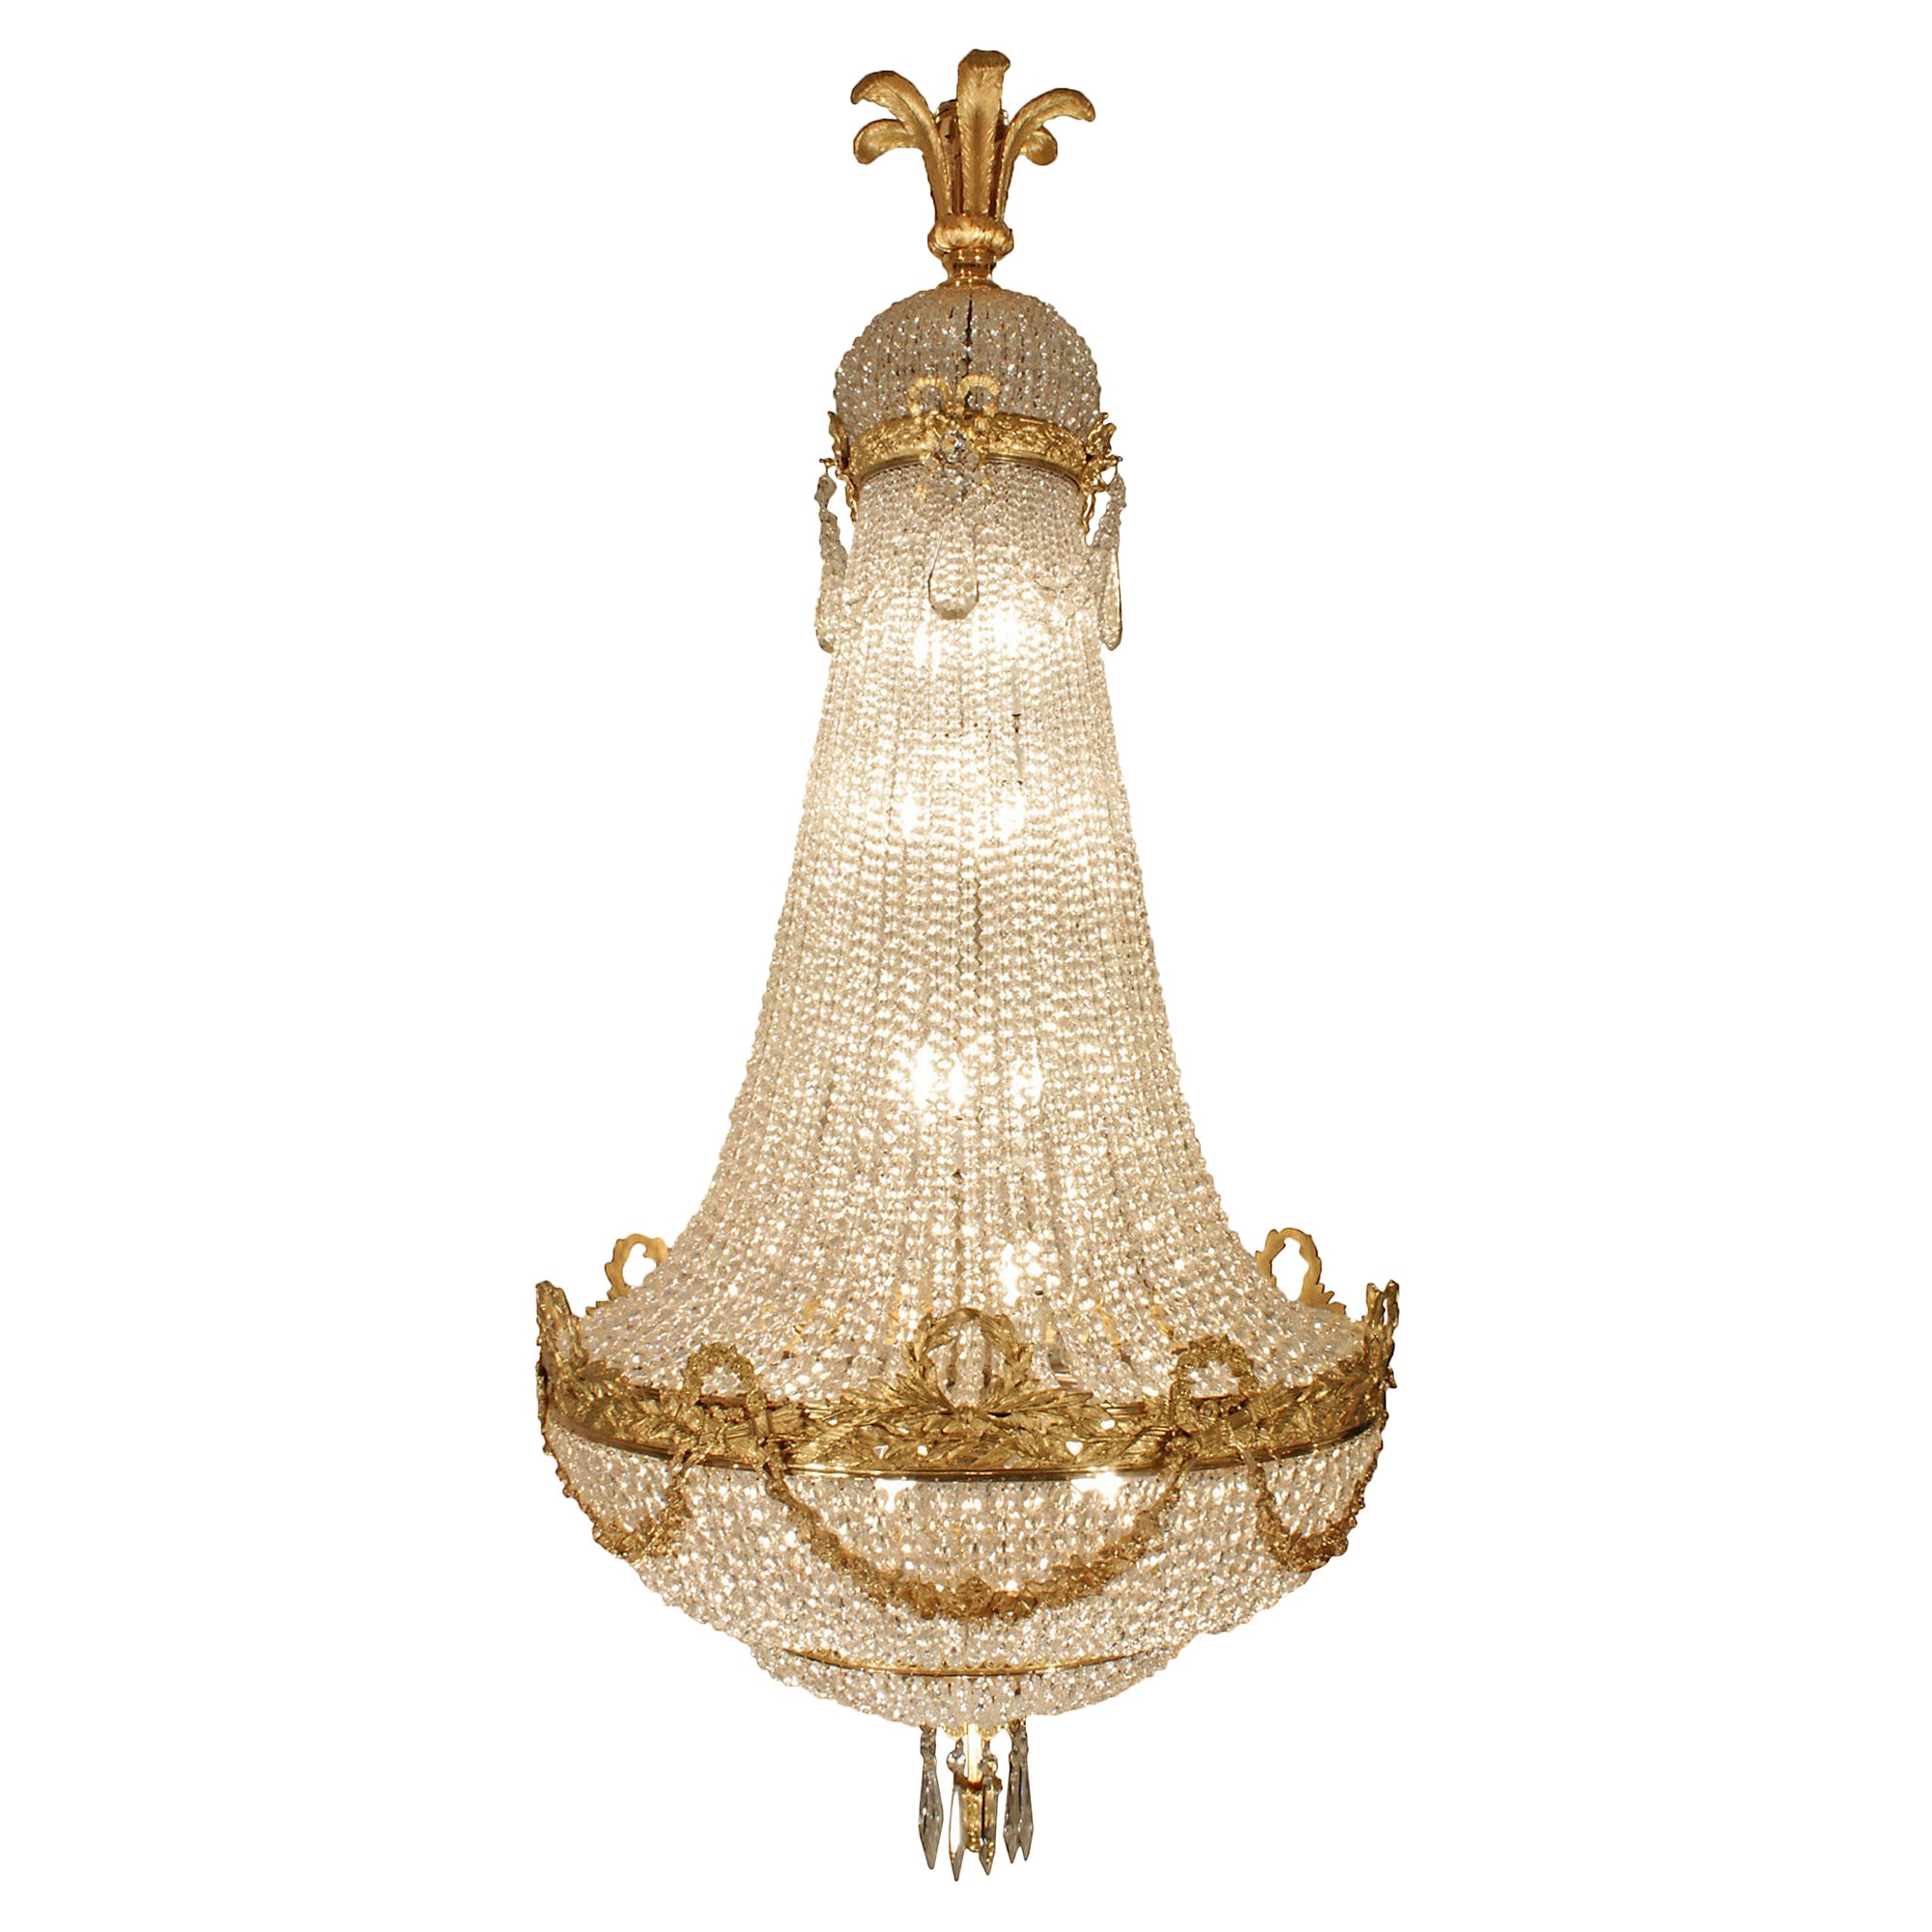 French Mid-19th Century Louis XVI Style Baccarat Crystal and Ormolu Chandelier For Sale